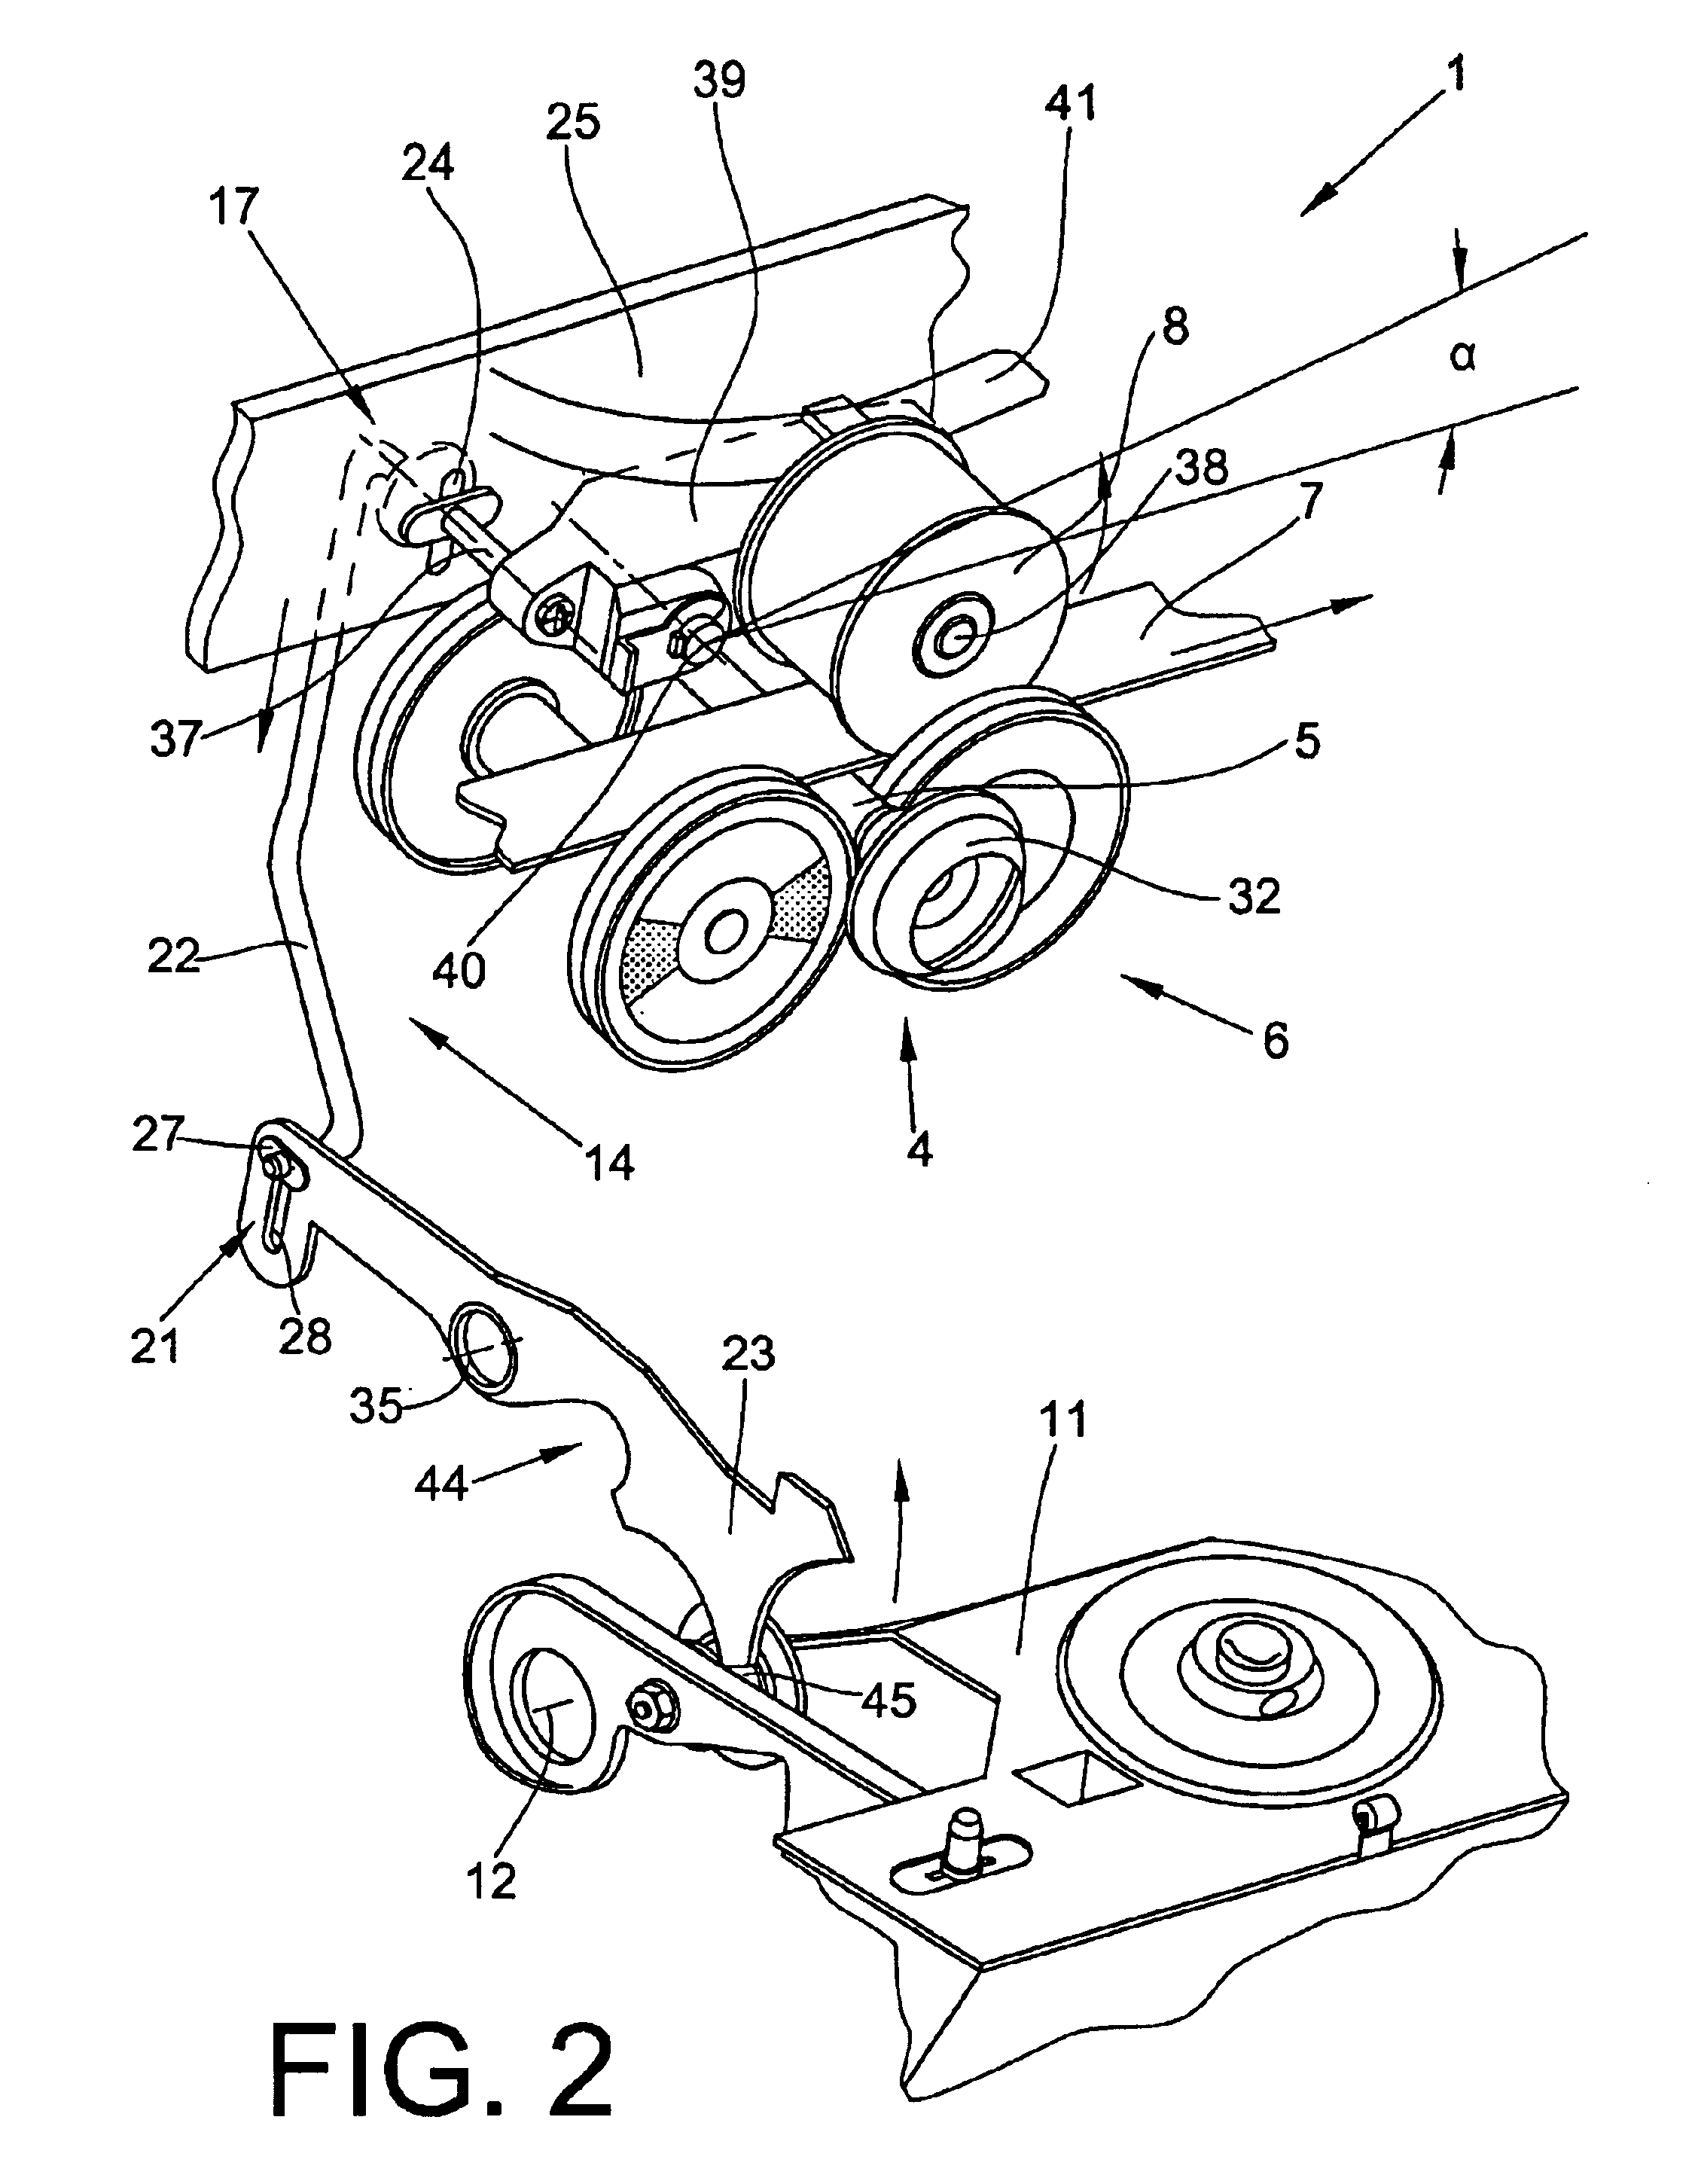 Spinning device